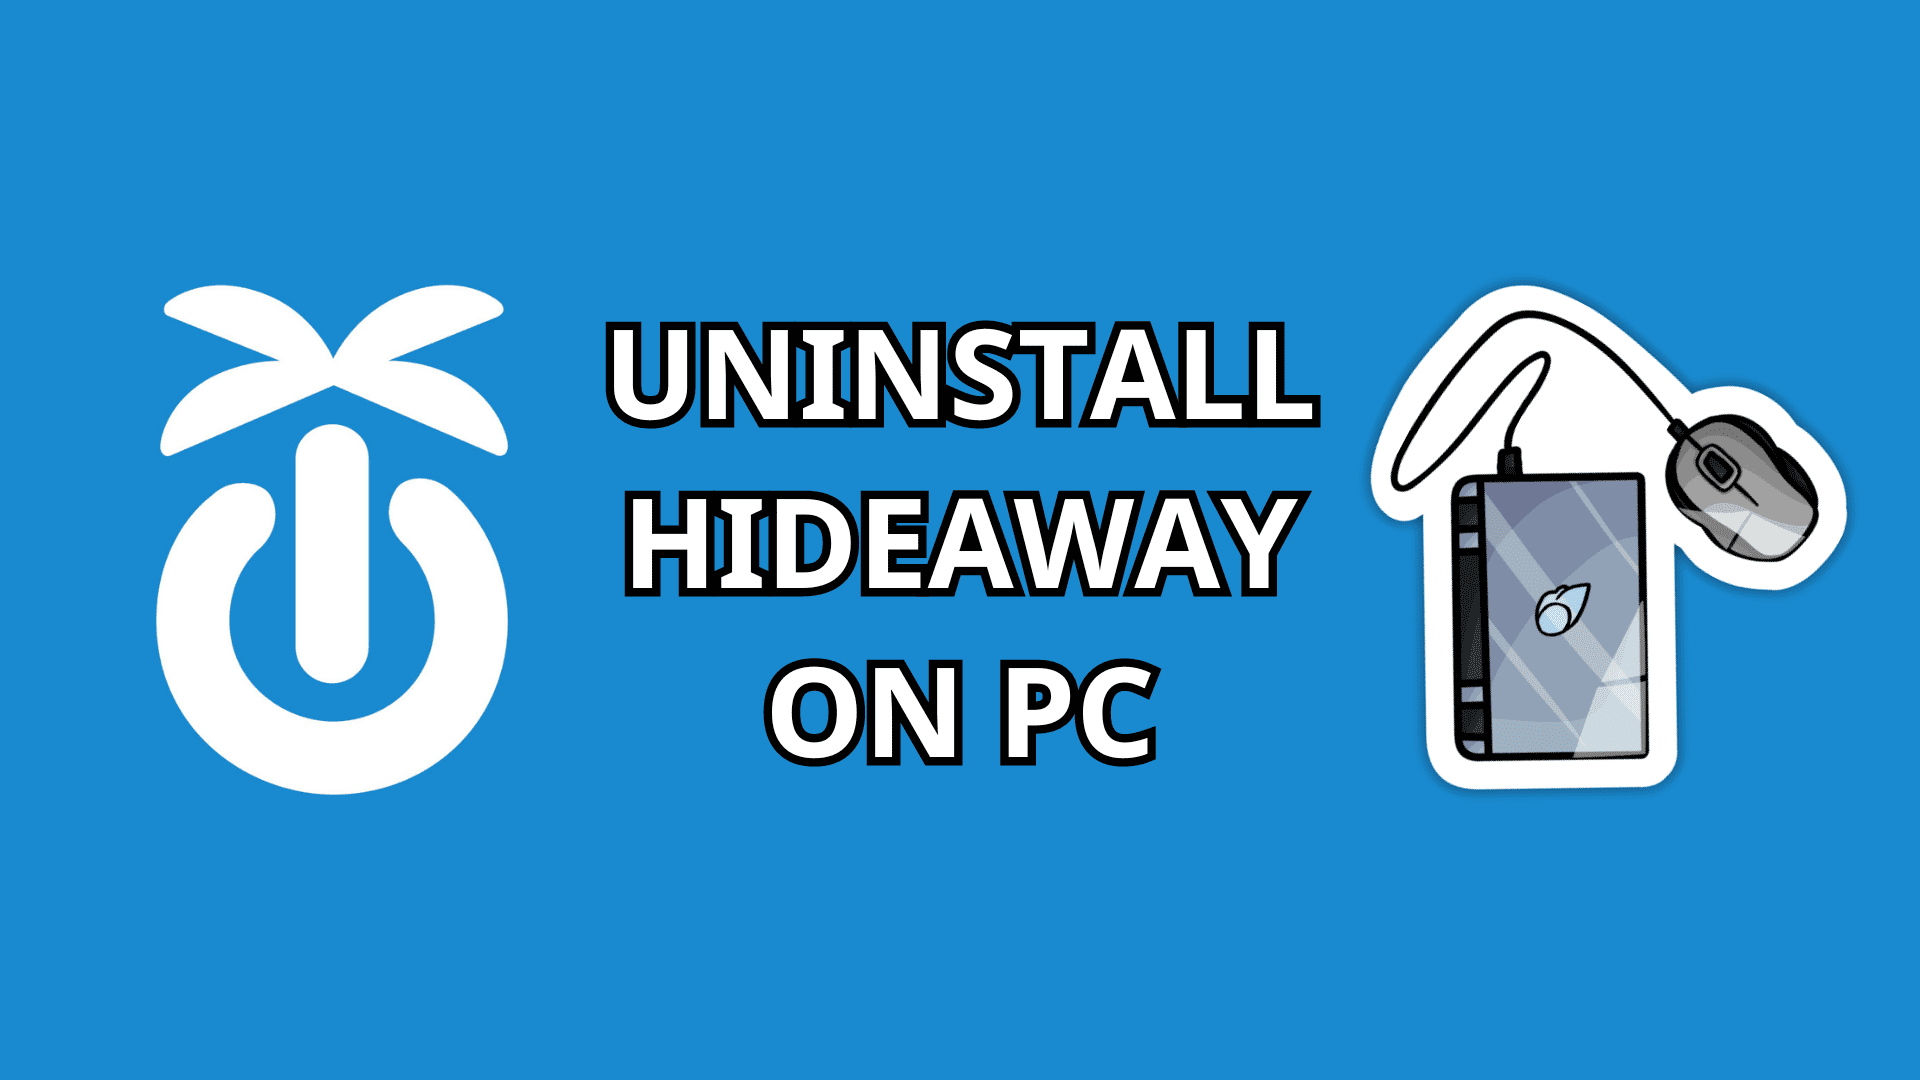 Uninstall Hideaway on PC text with Hideaway logo and grey laptop icon with mouse